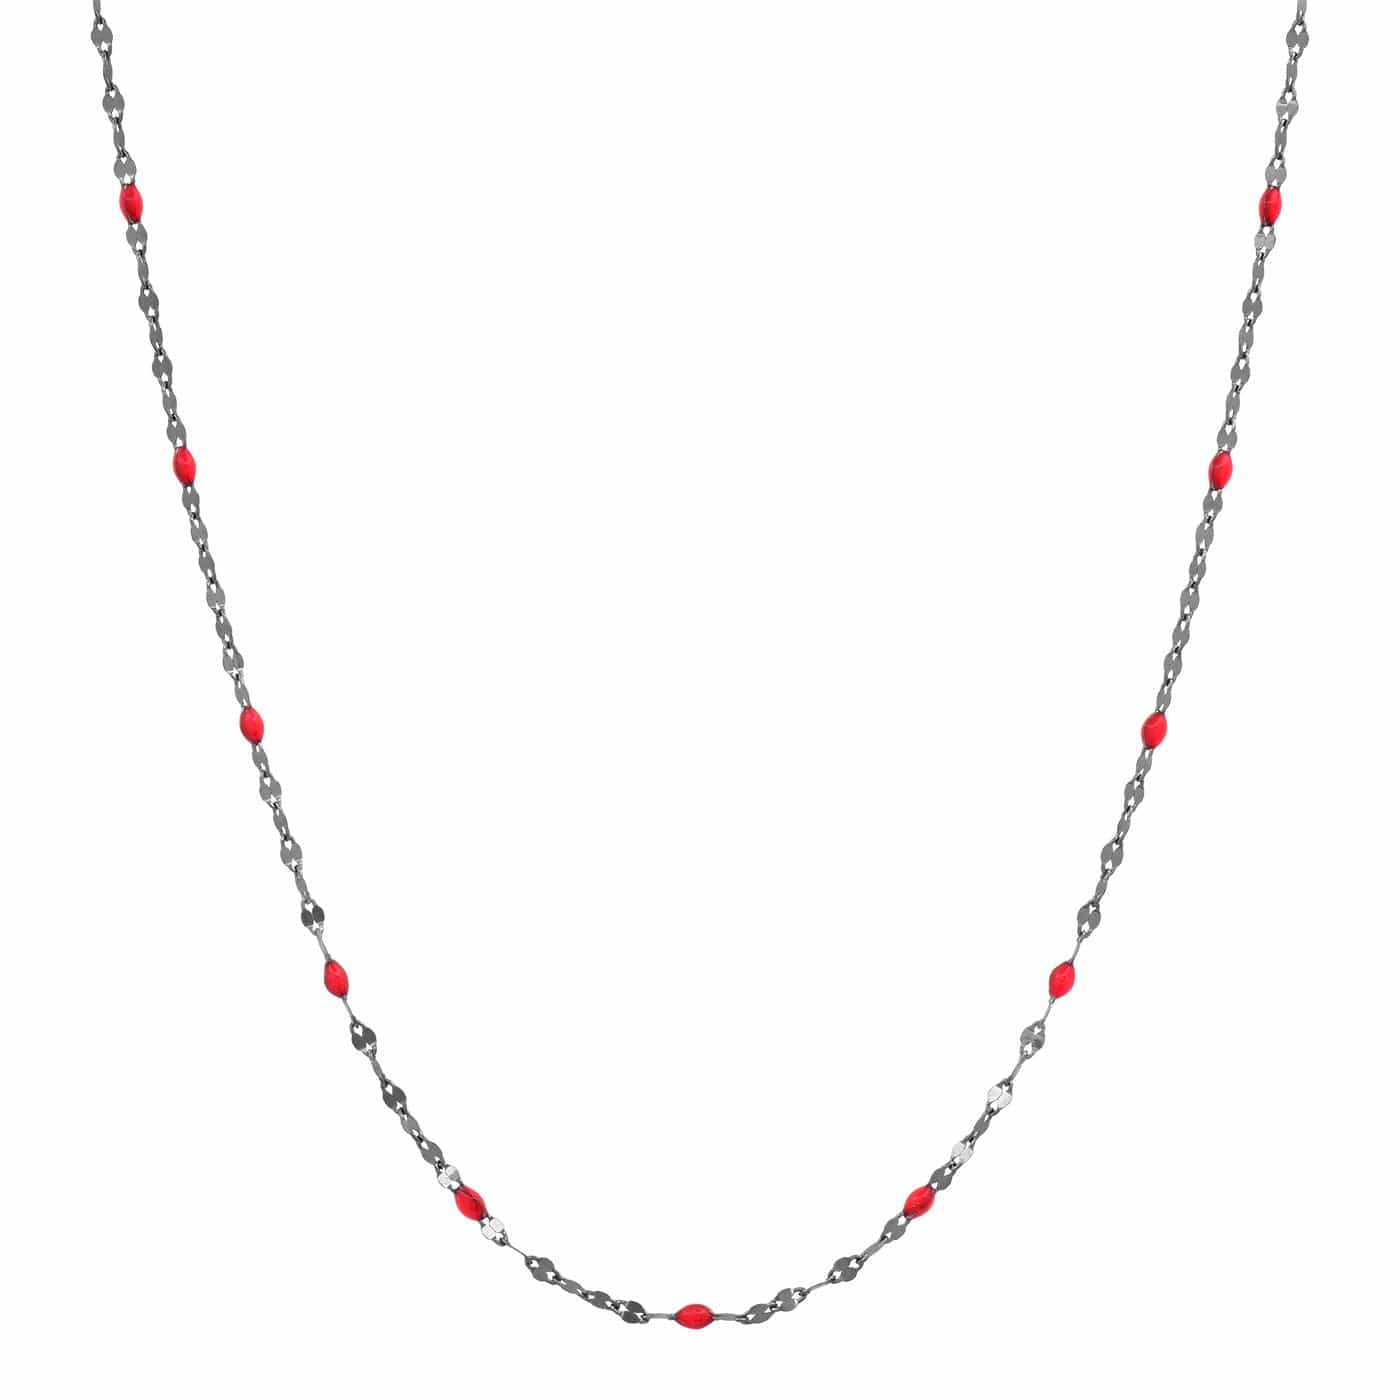 TAI JEWELRY Necklace Black/Red Gold Vermeil Sparkle Chain with Enamel Stations